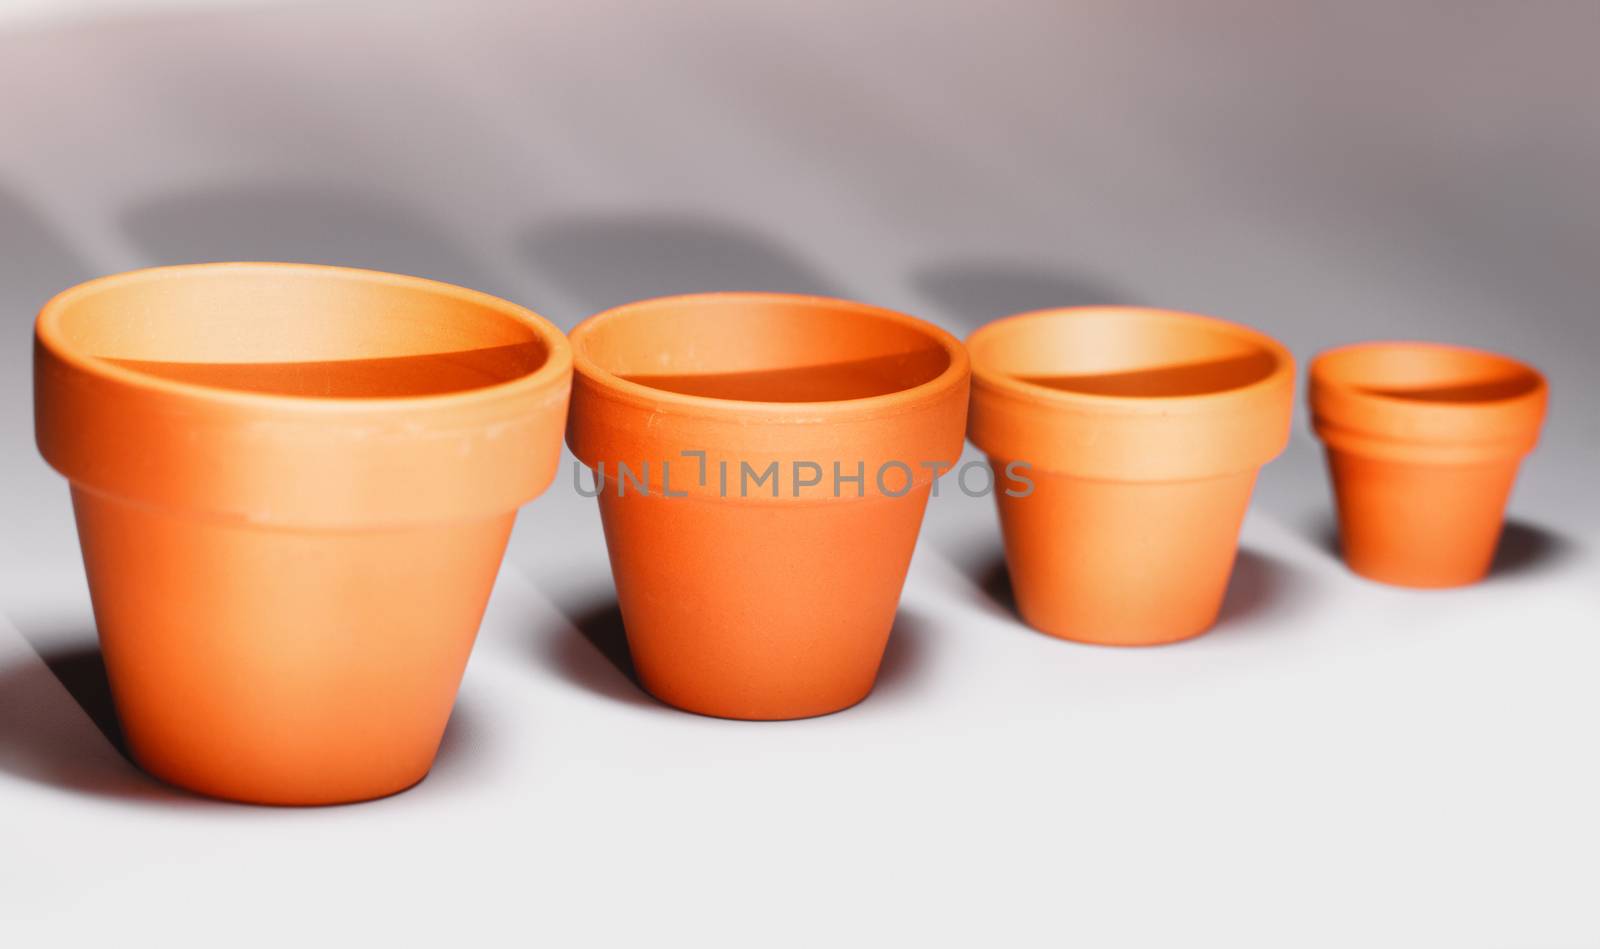 Photo of empty clay plant or flower pots